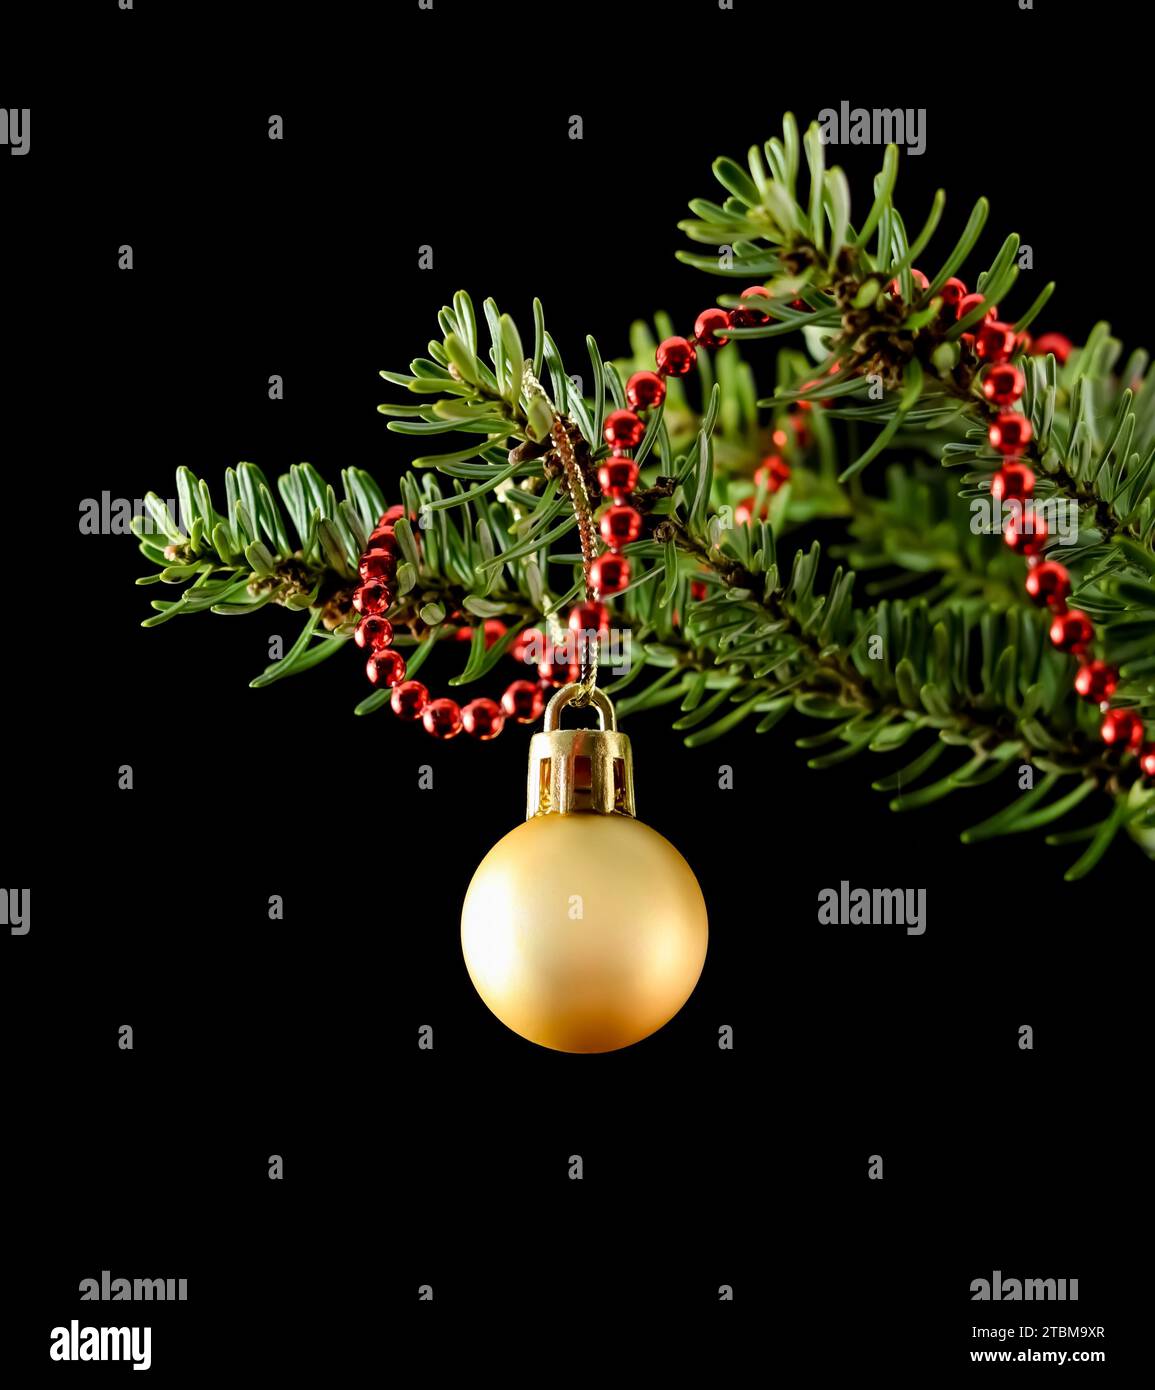 Yellow ball and red string of beads on a green branch of a Christmas tree isolated on a black background. Holiday concept Stock Photo